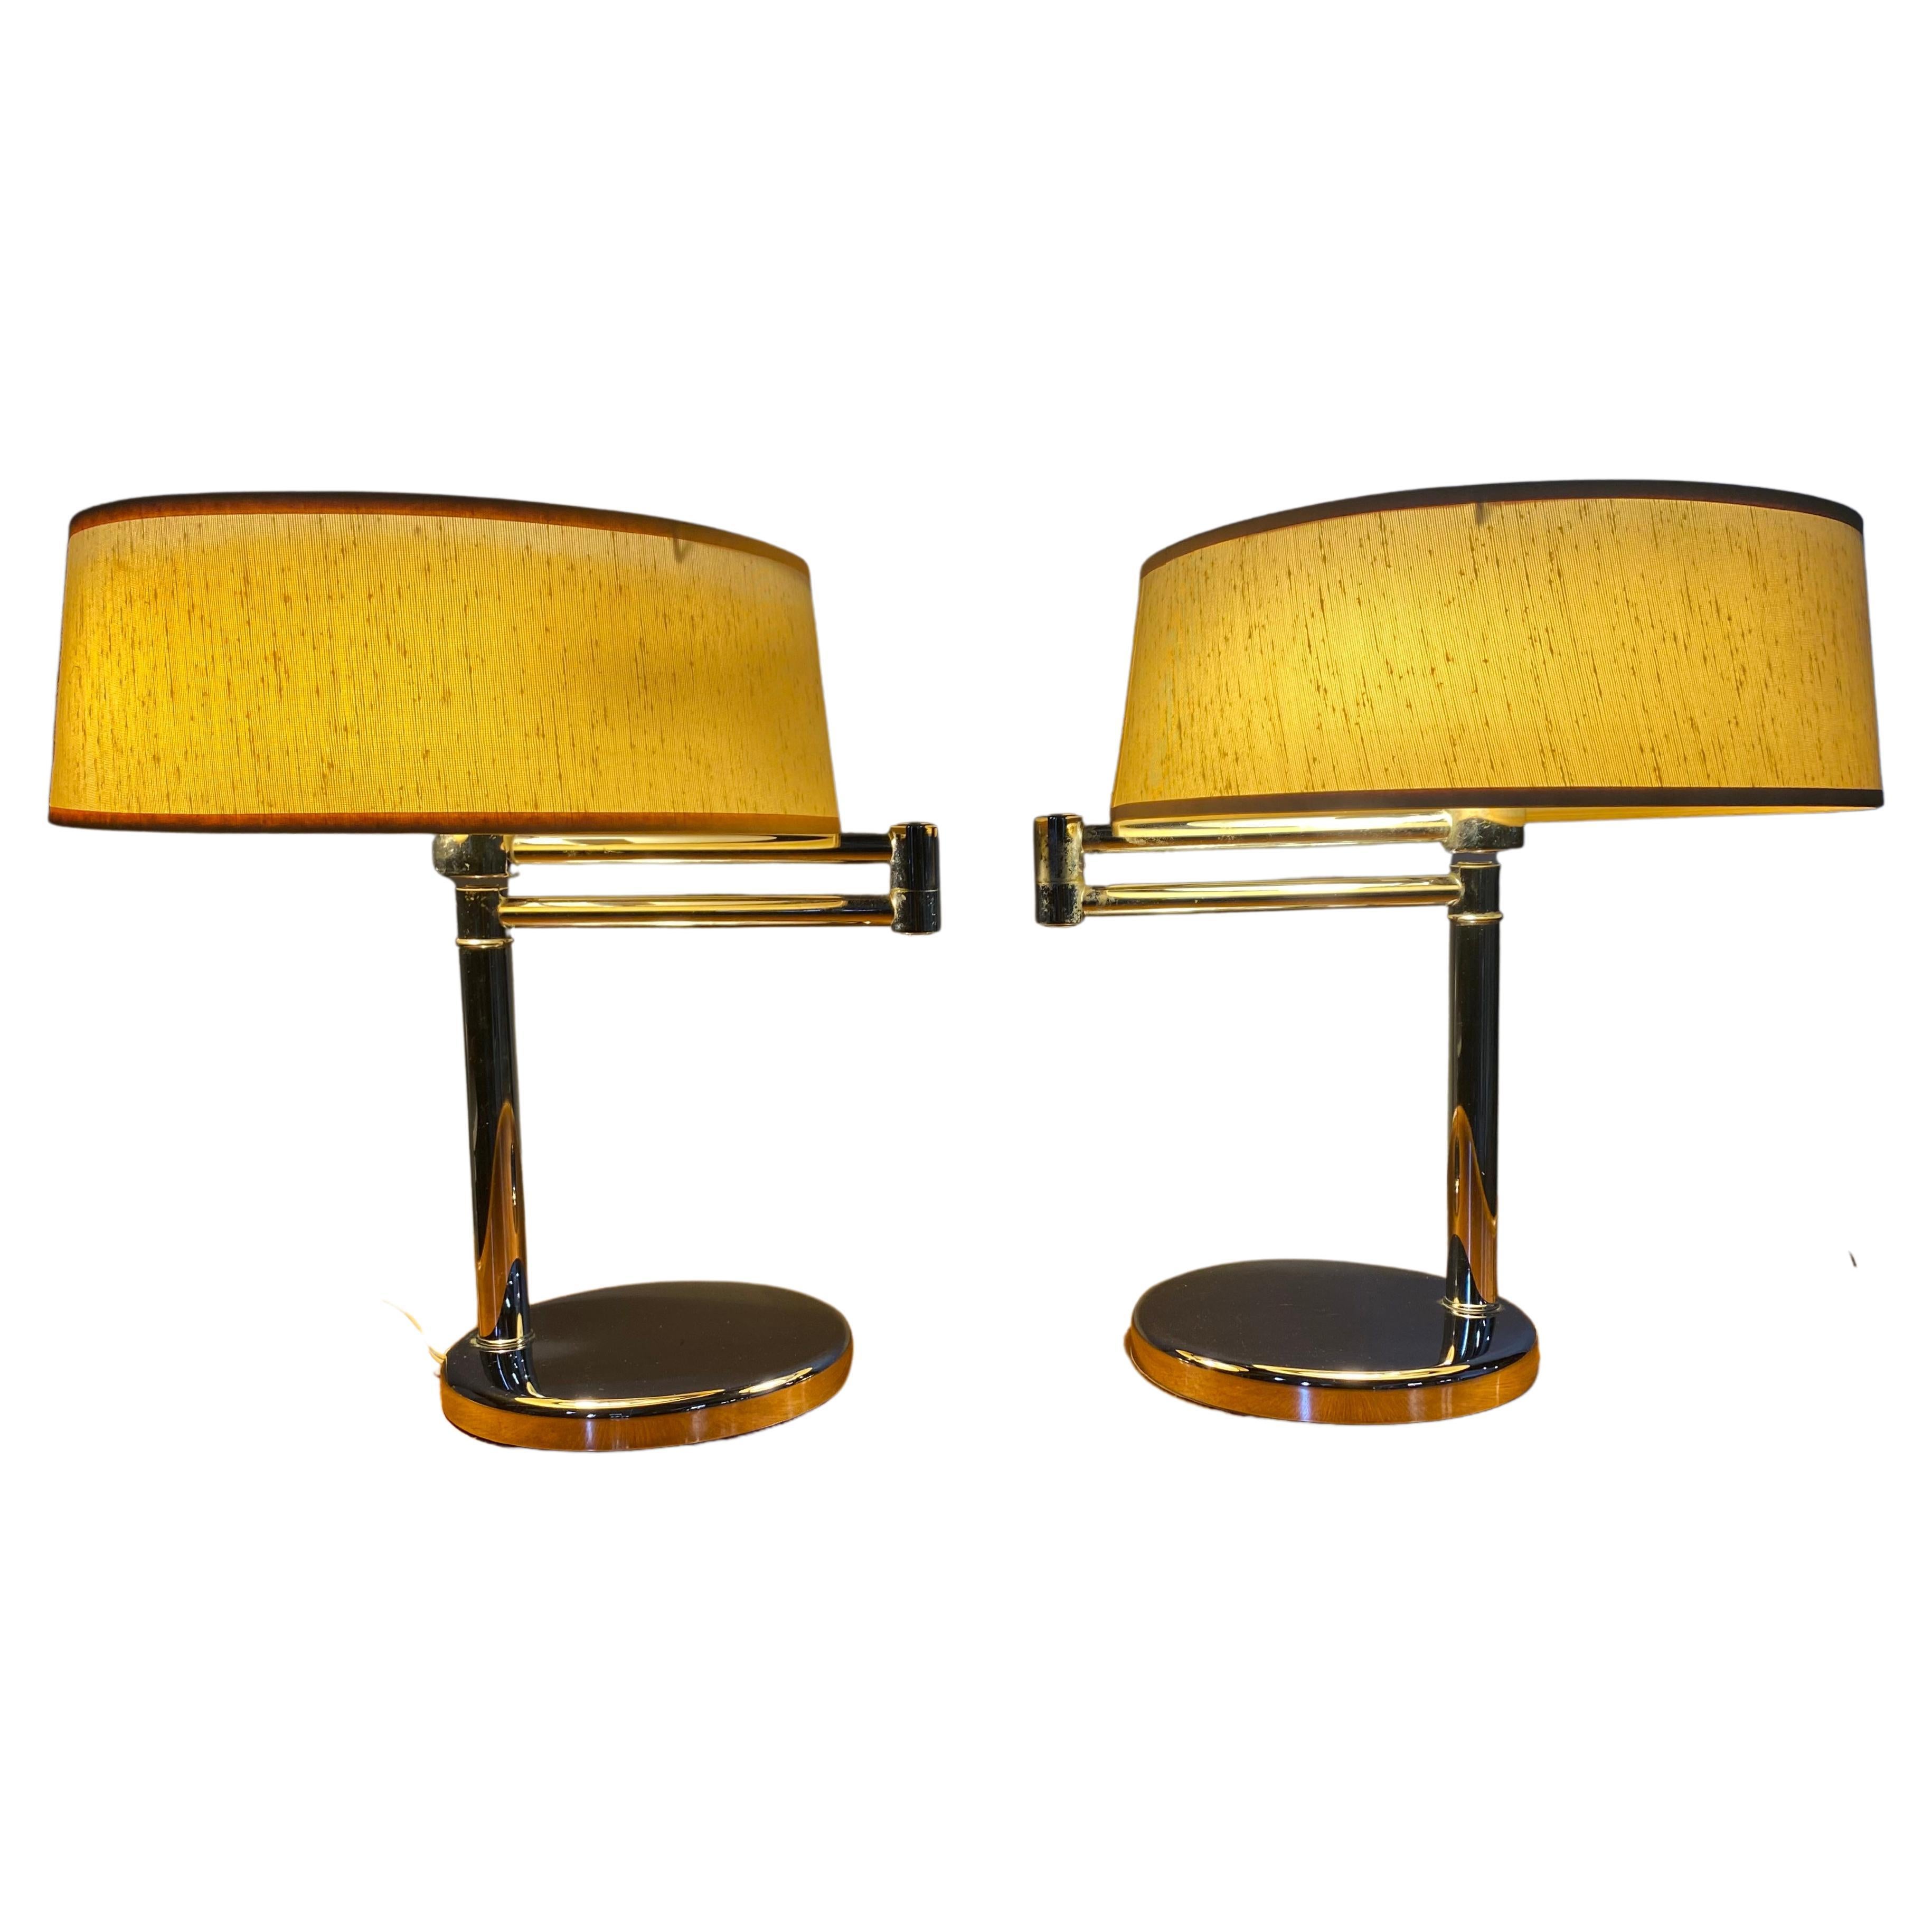 Matched Pair Walter Von Nessen Swing Out Table/ Desk Lamps, Nessen Studio's